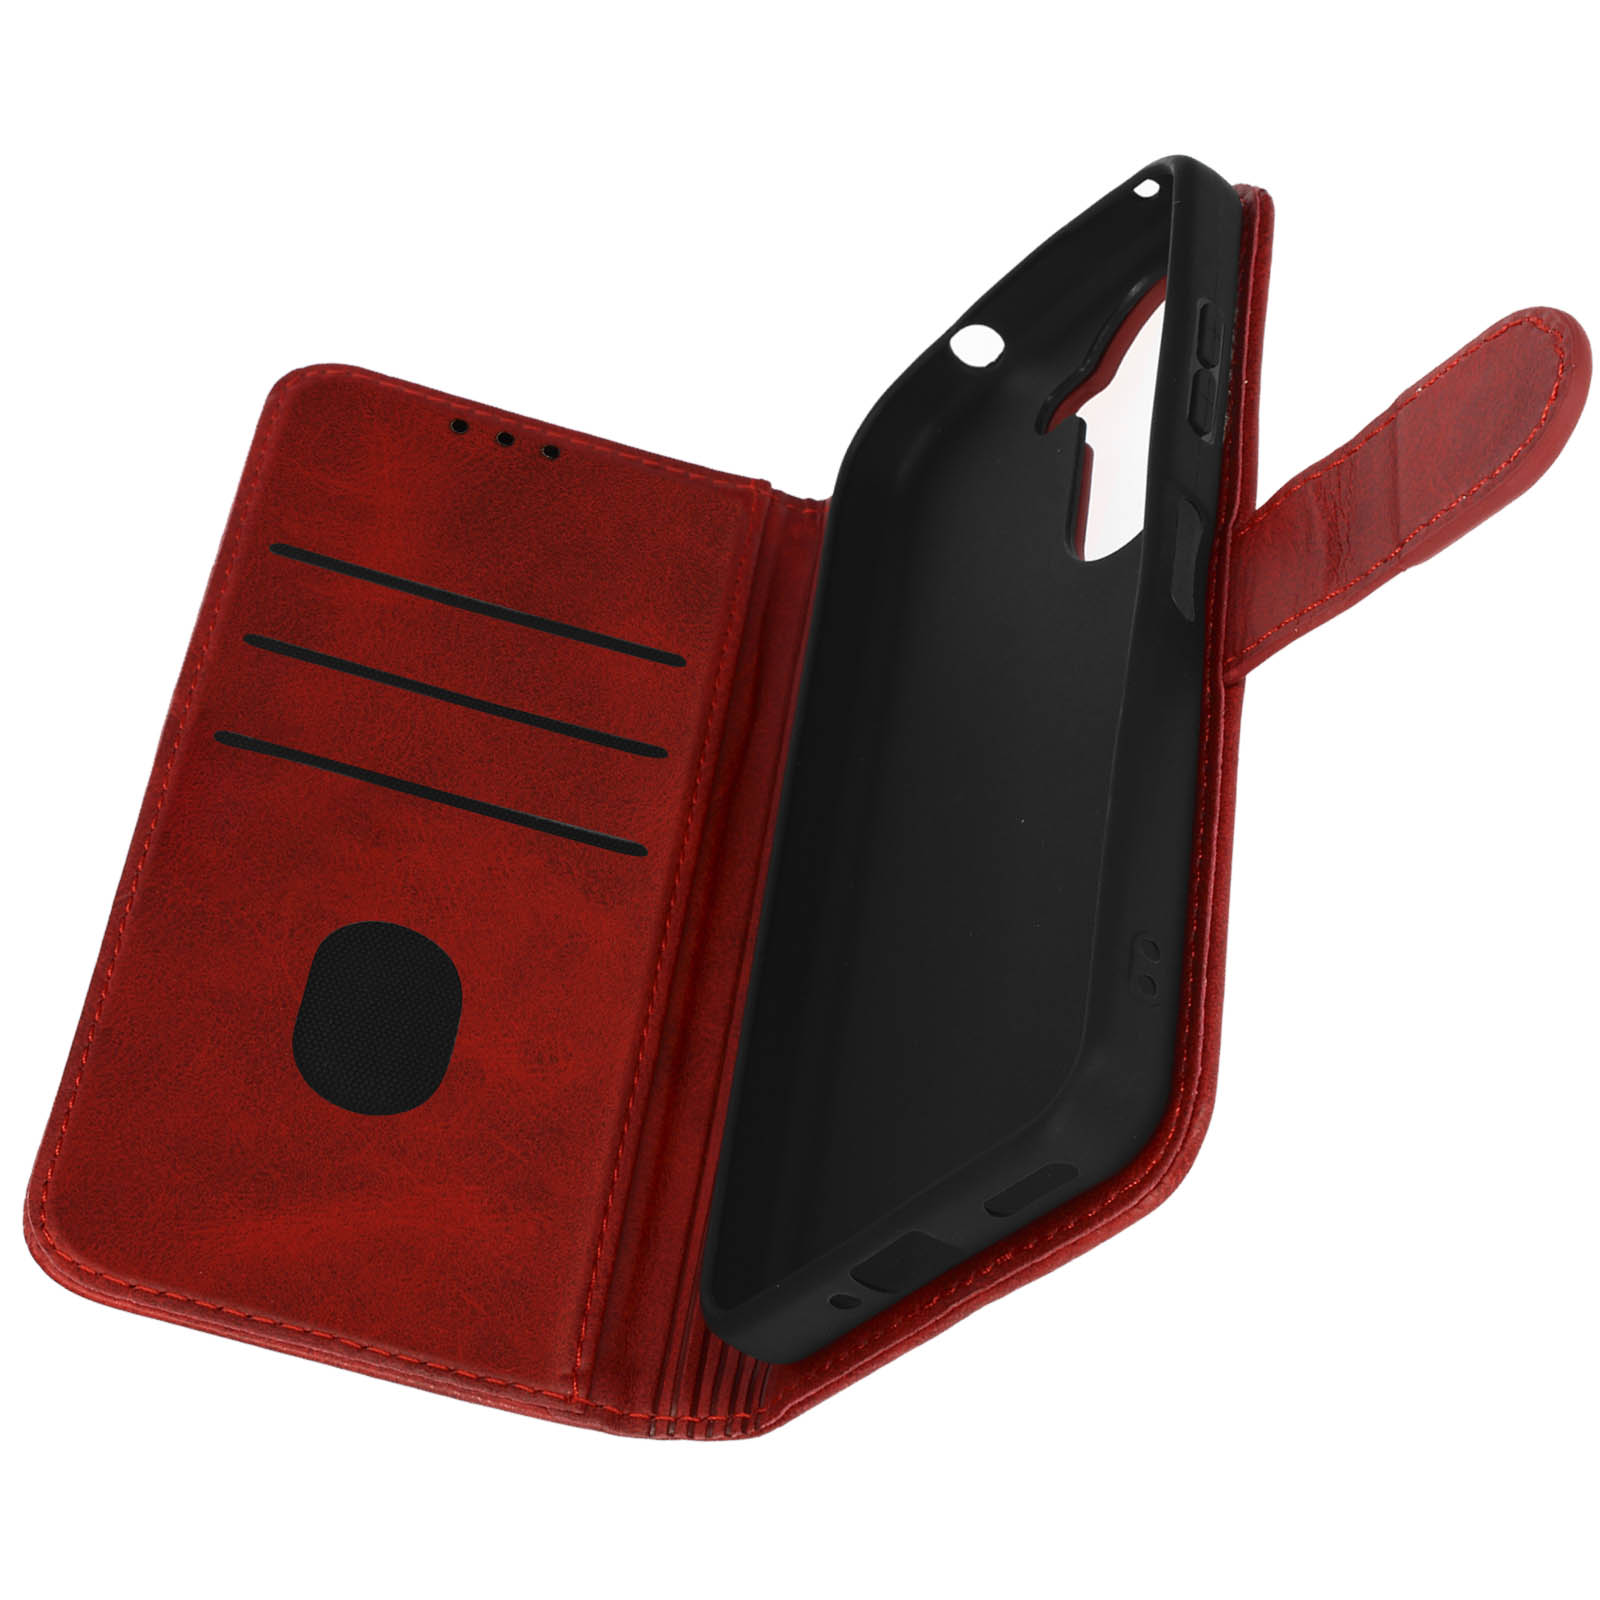 AVIZAR Bookstyle Bookcover, Zenfone Series, 10, Rot Asus